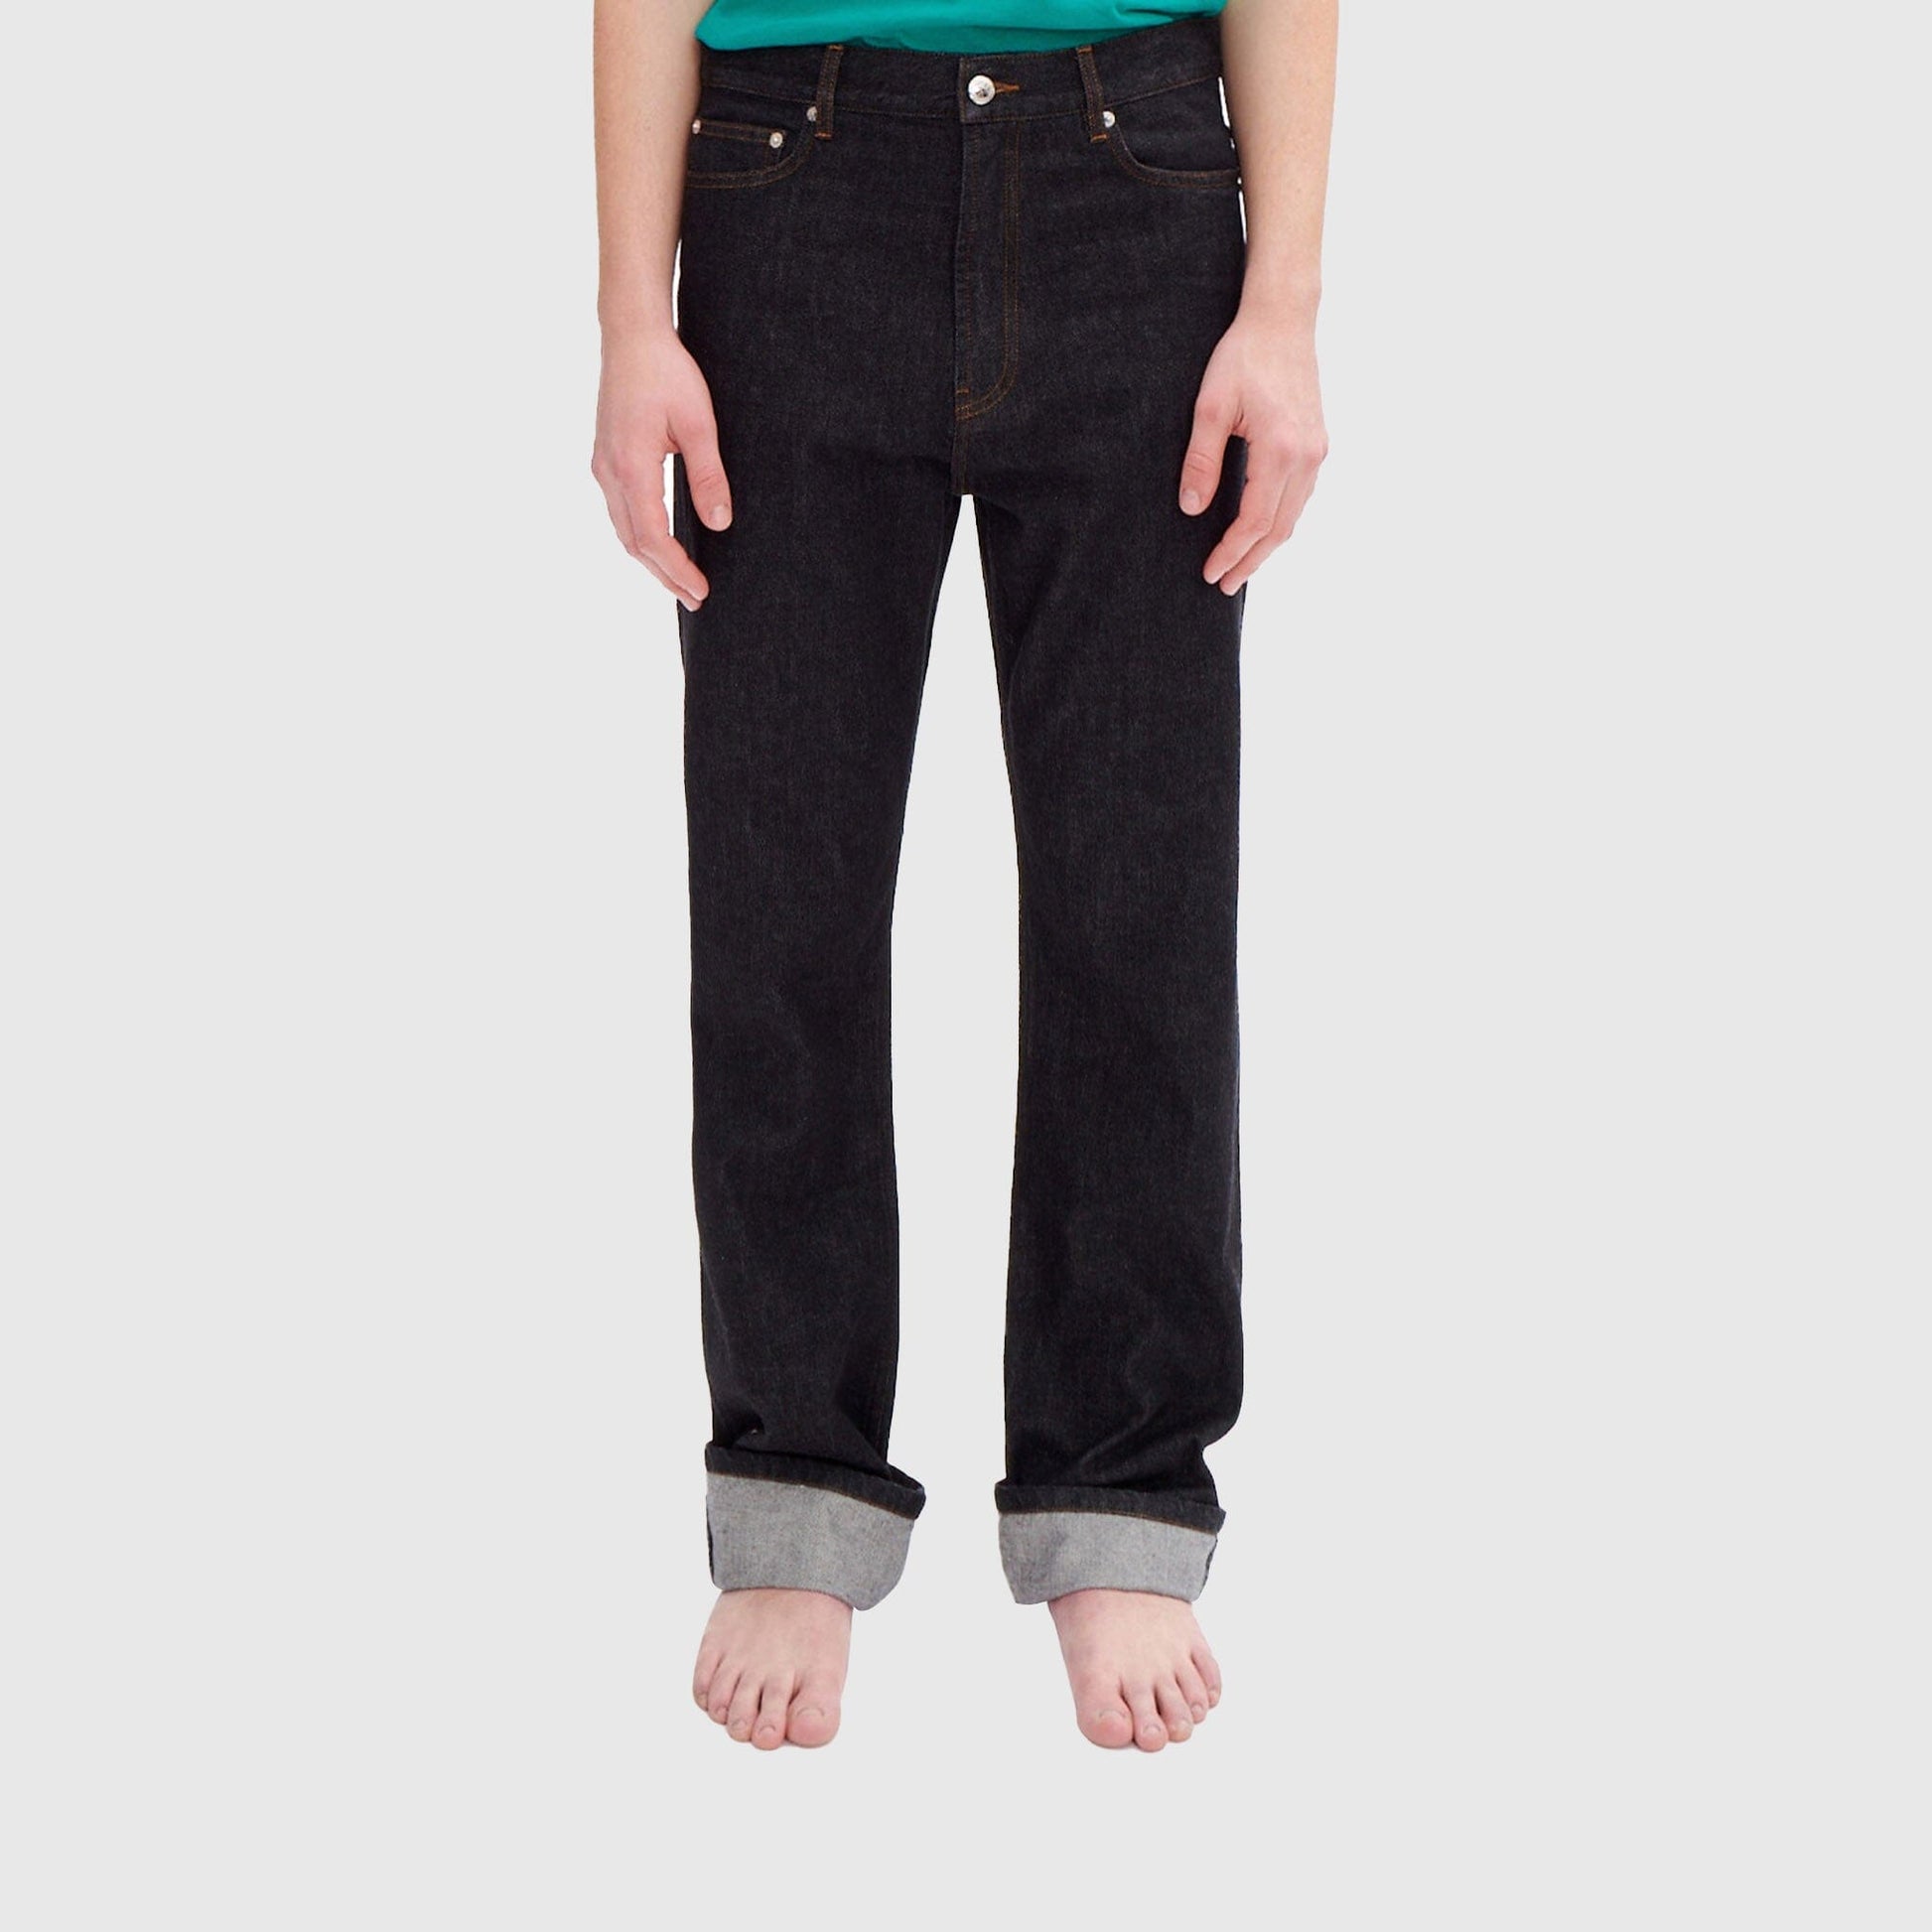 A.P.C. x JW Anderson Willie Jeans - Washed Black Pants A.P.C. x JW Anderson 